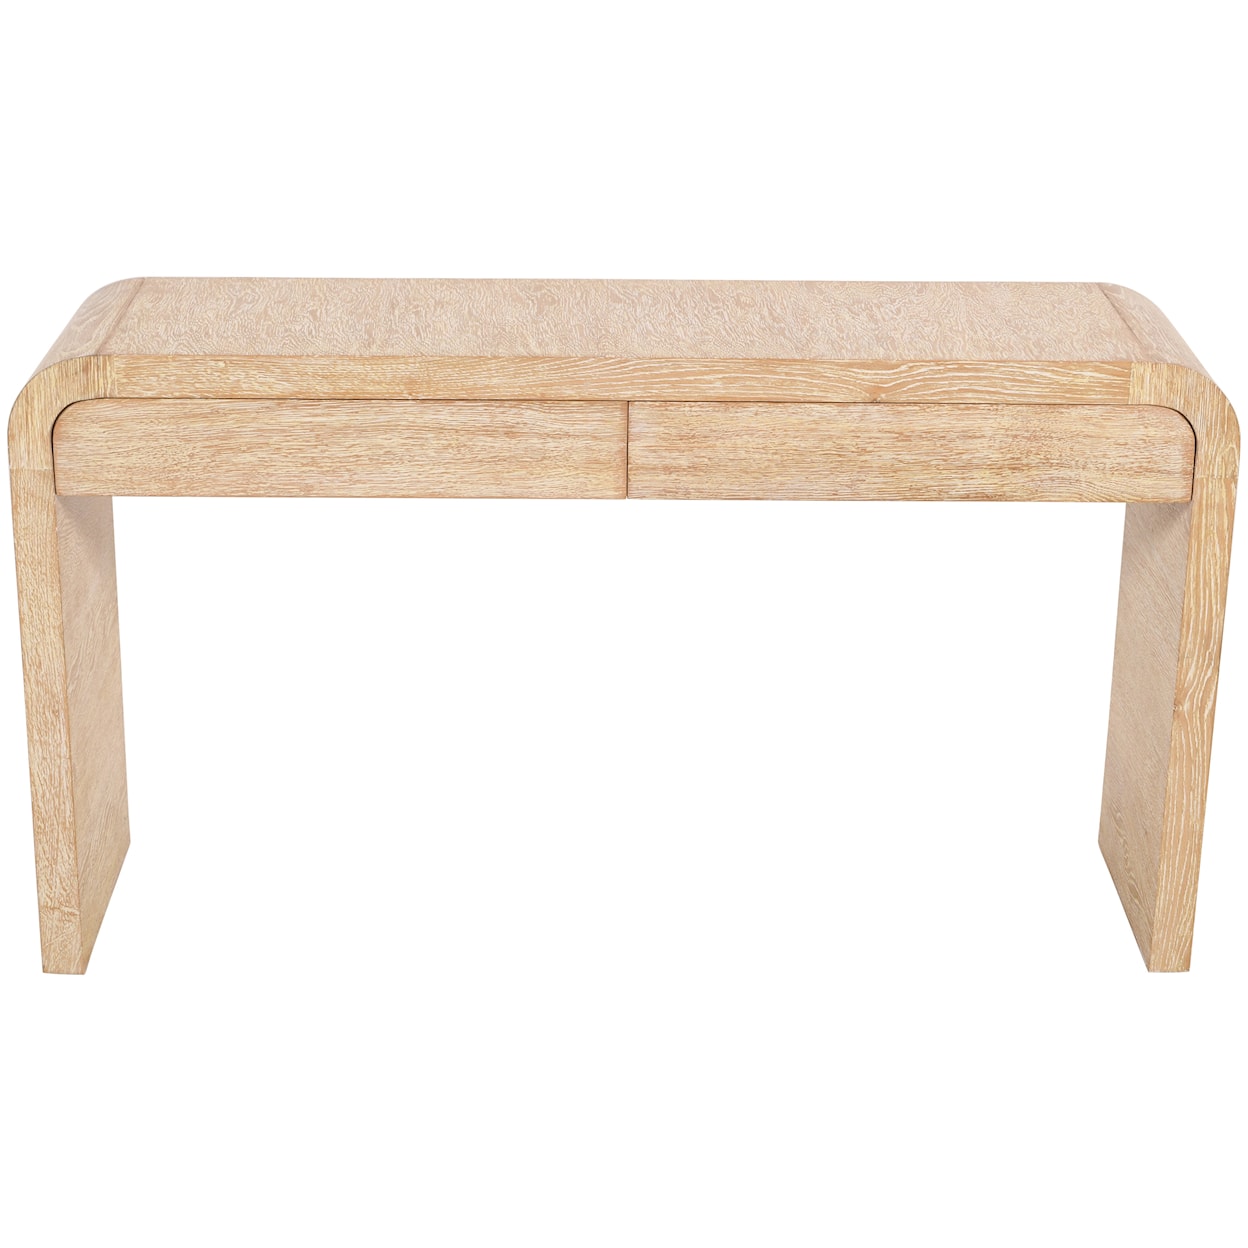 Meridian Furniture Cresthill Console Table